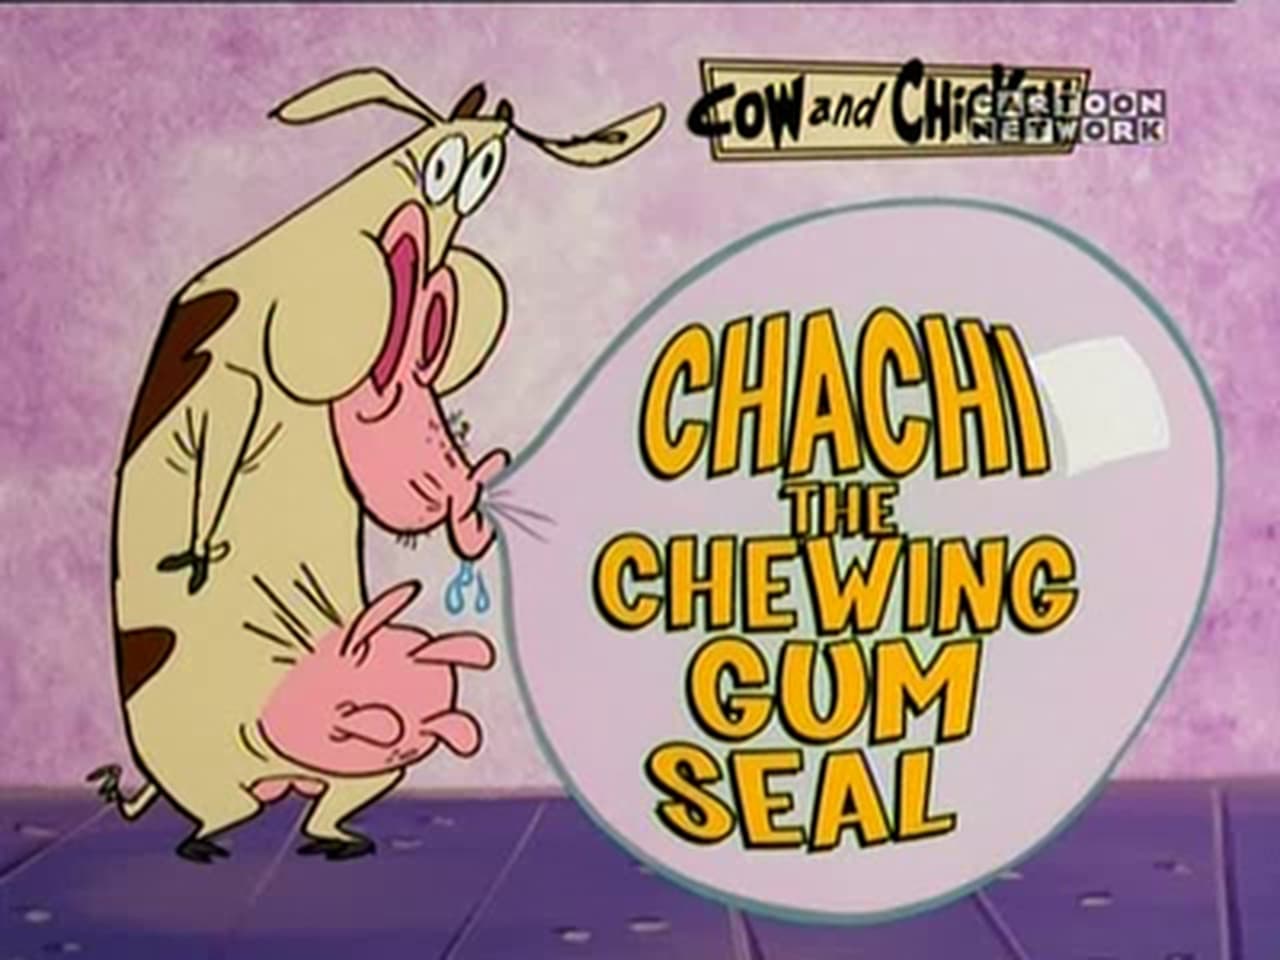 Chachi the Chewing Gum Seal